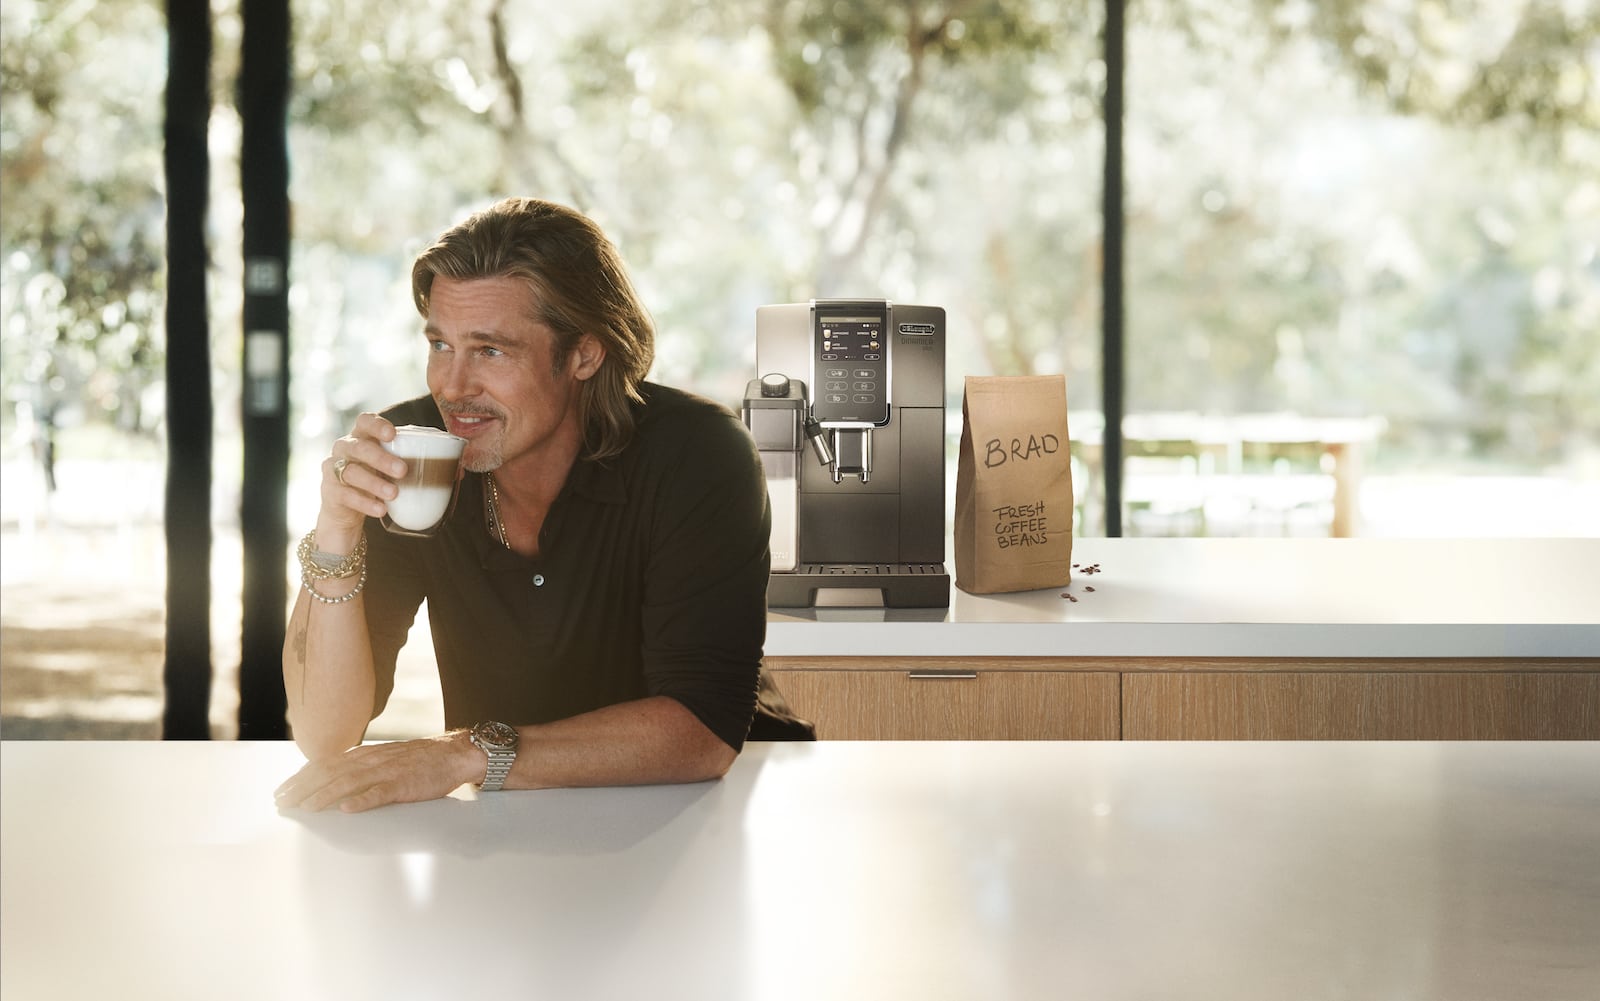 American actor Brad Pitt enjoying a cup of coffee in the De'Longhi Perfetto Ad